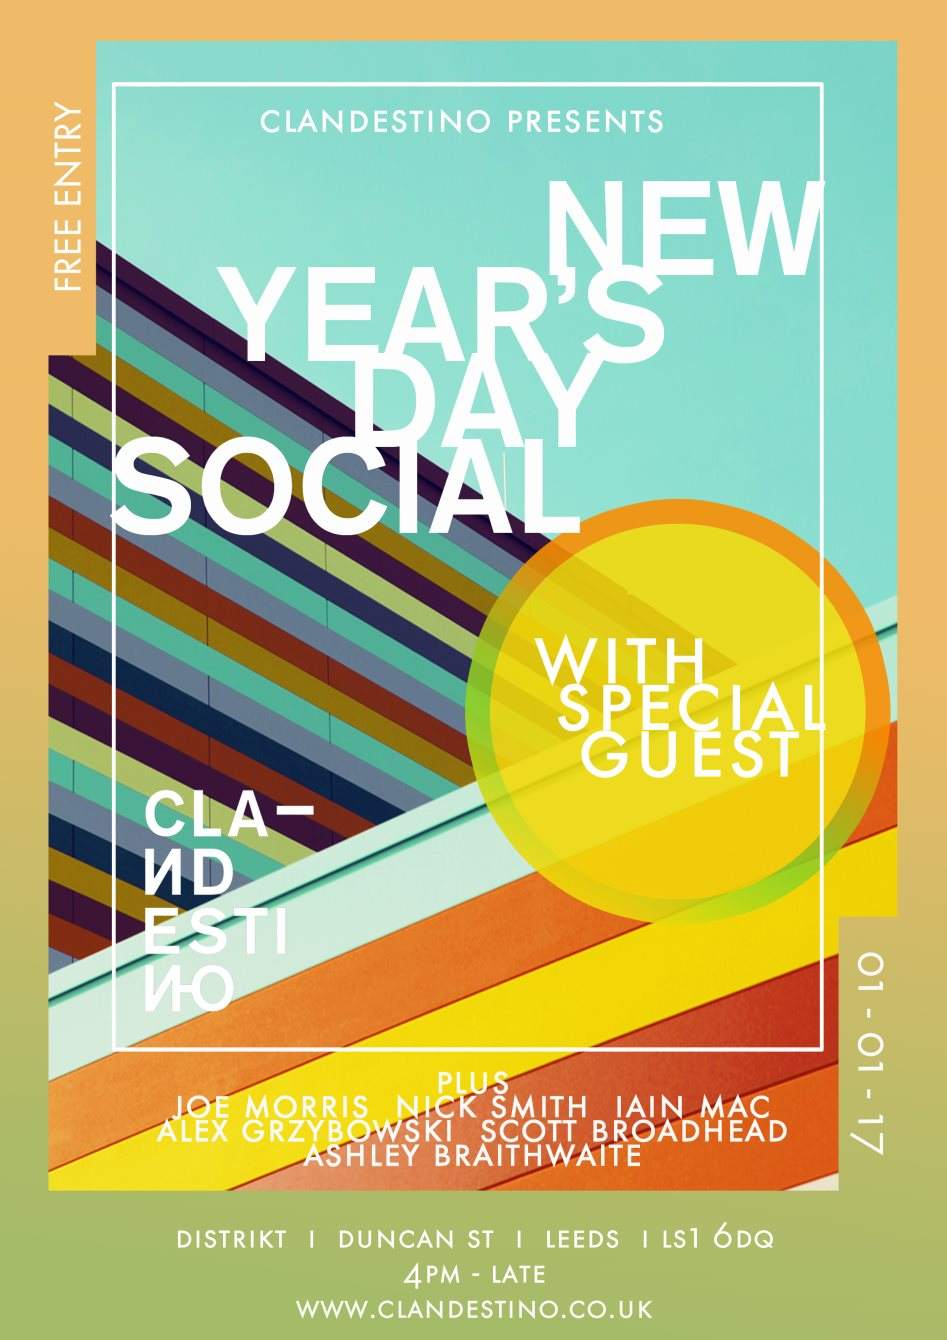 Clandestino New Year's Day Social with Special Guest - フライヤー表